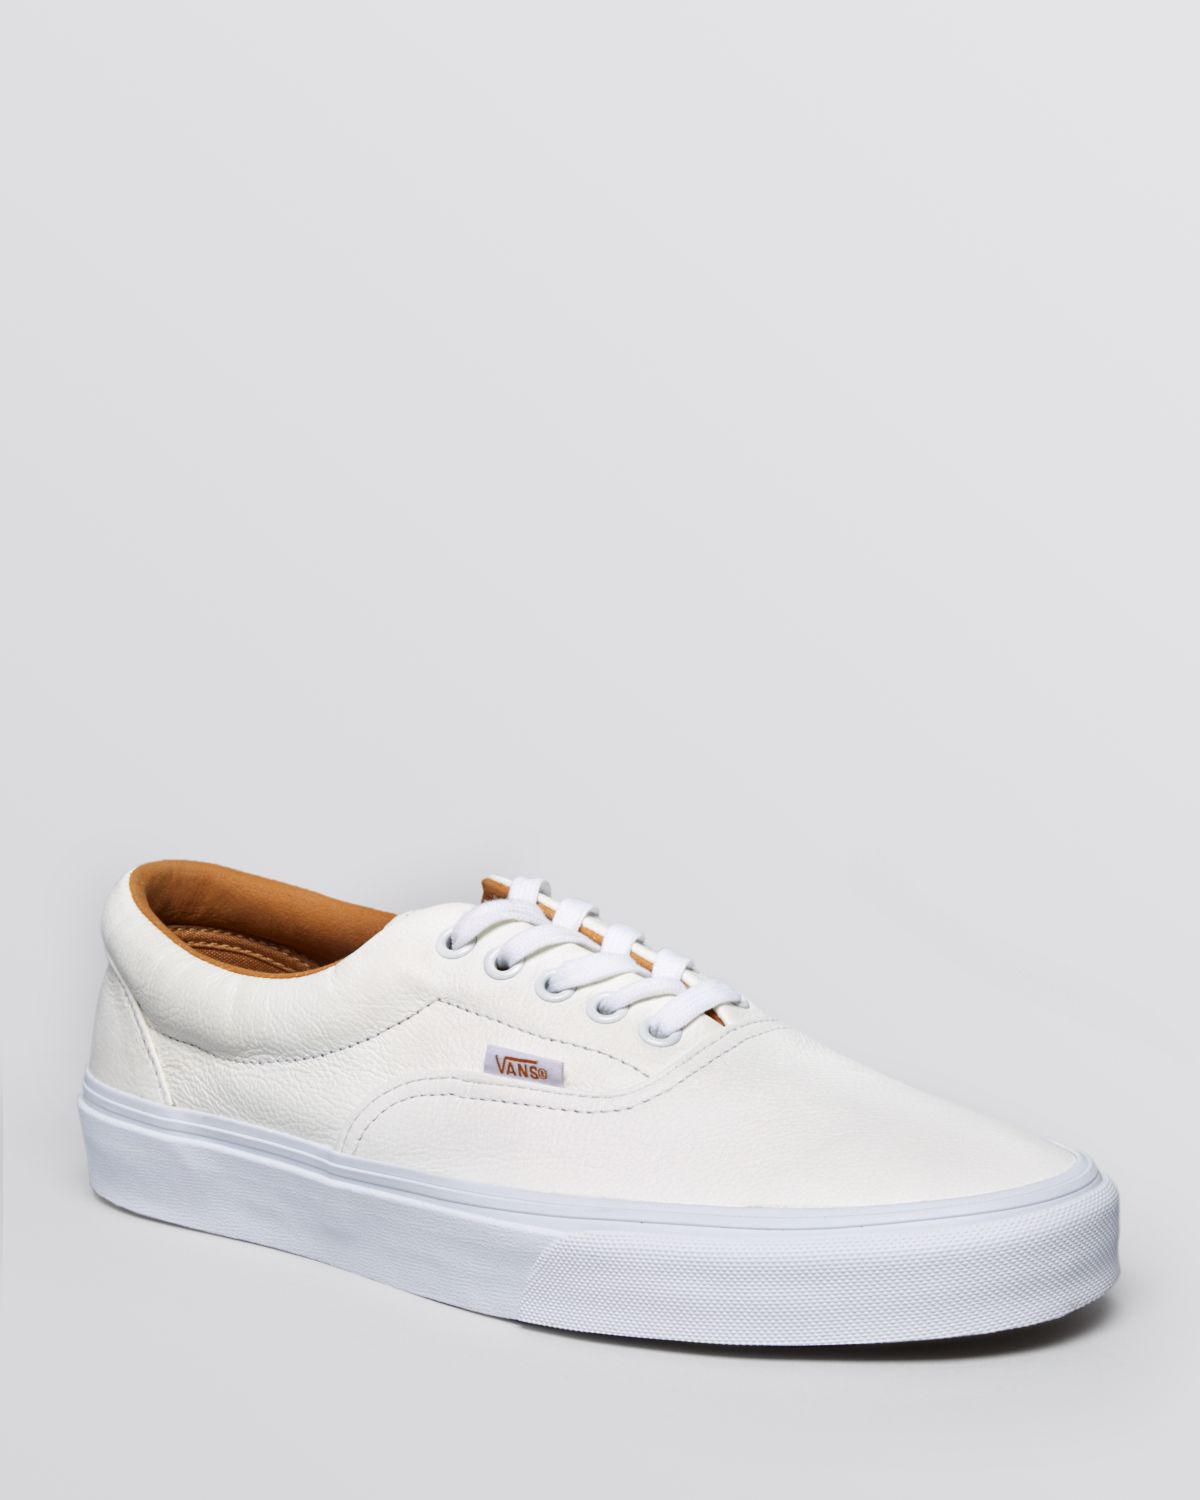 white leather lace up vans cheap online